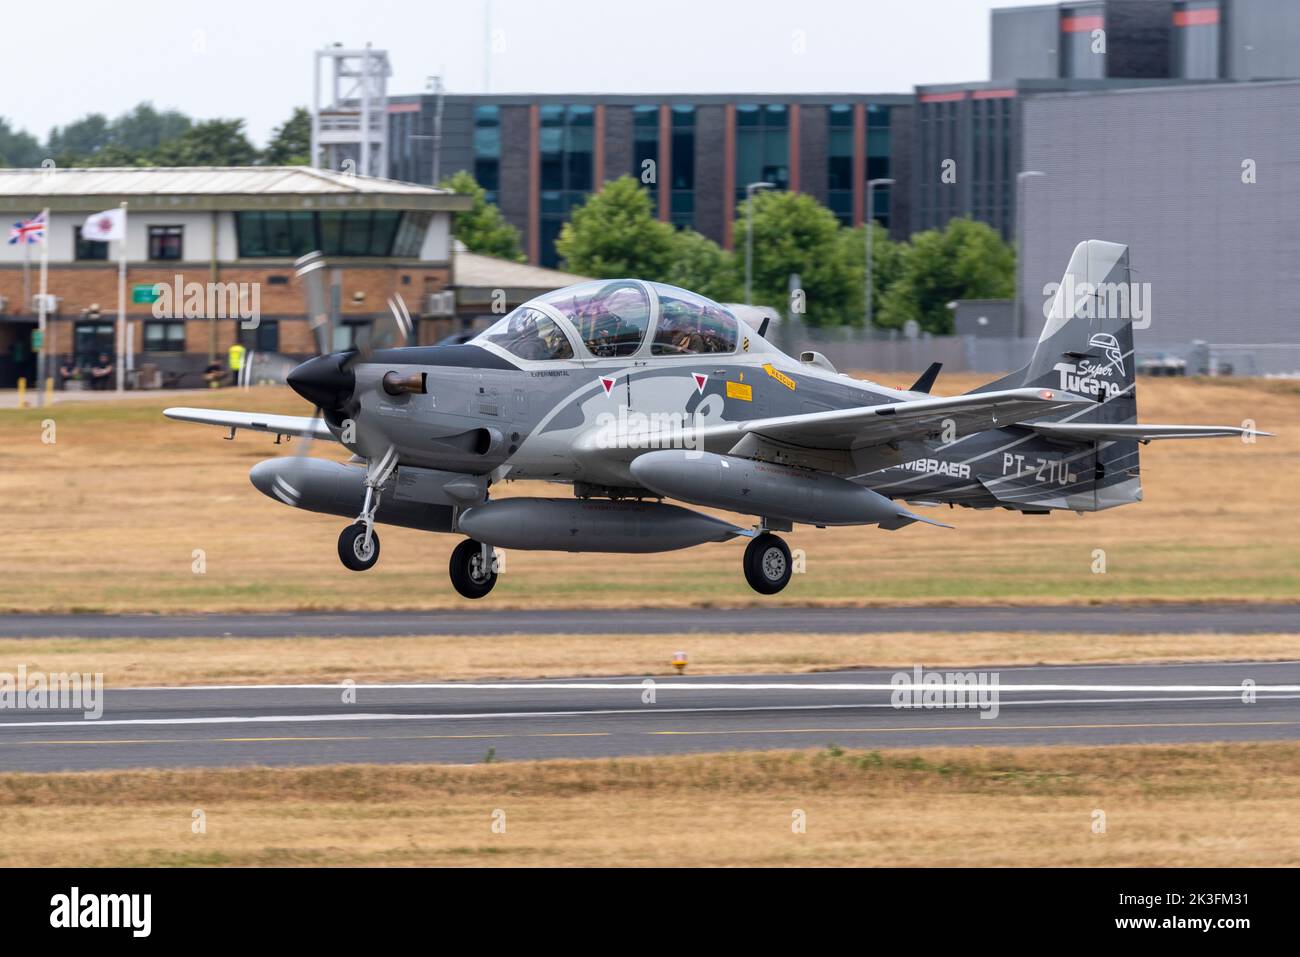 Embraer EMB 314 Super Tucano, also named ALX or A-29, turboprop light attack aircraft landing after display at Farnborough International Airshow 2022 Stock Photo